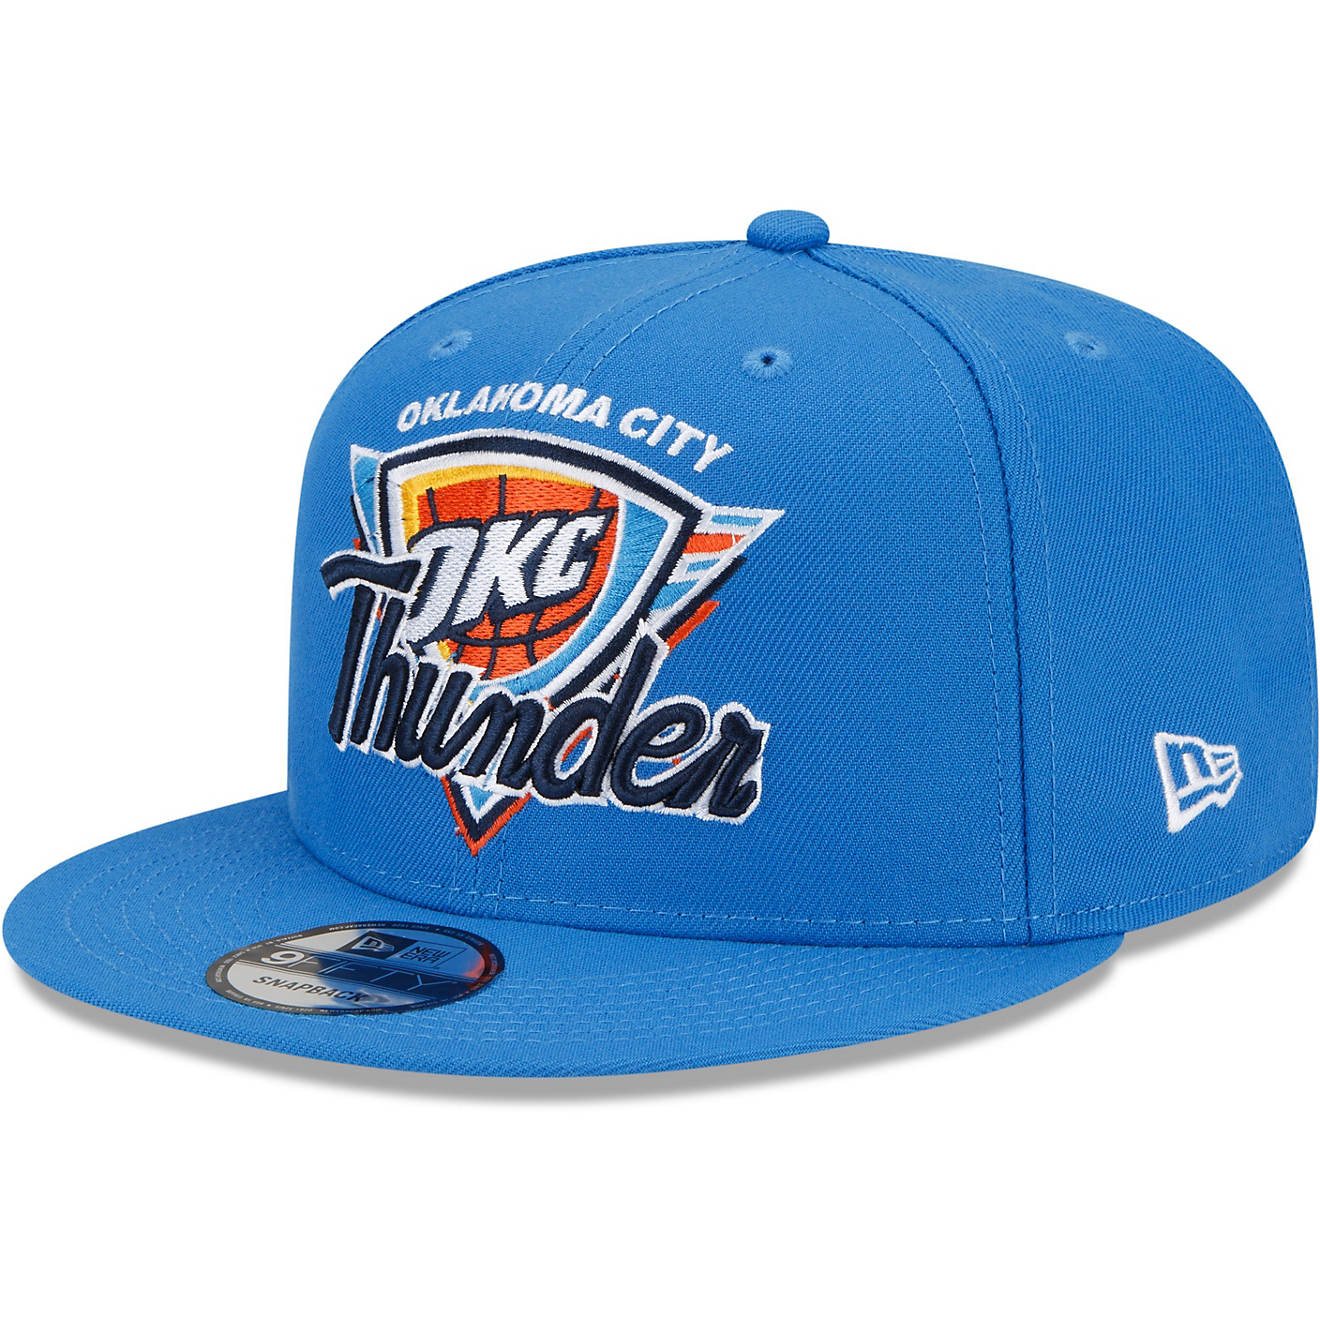 New Era Men's Oklahoma City Thunder '21 Tip Off 9FIFTY Cap                                                                       - view number 1